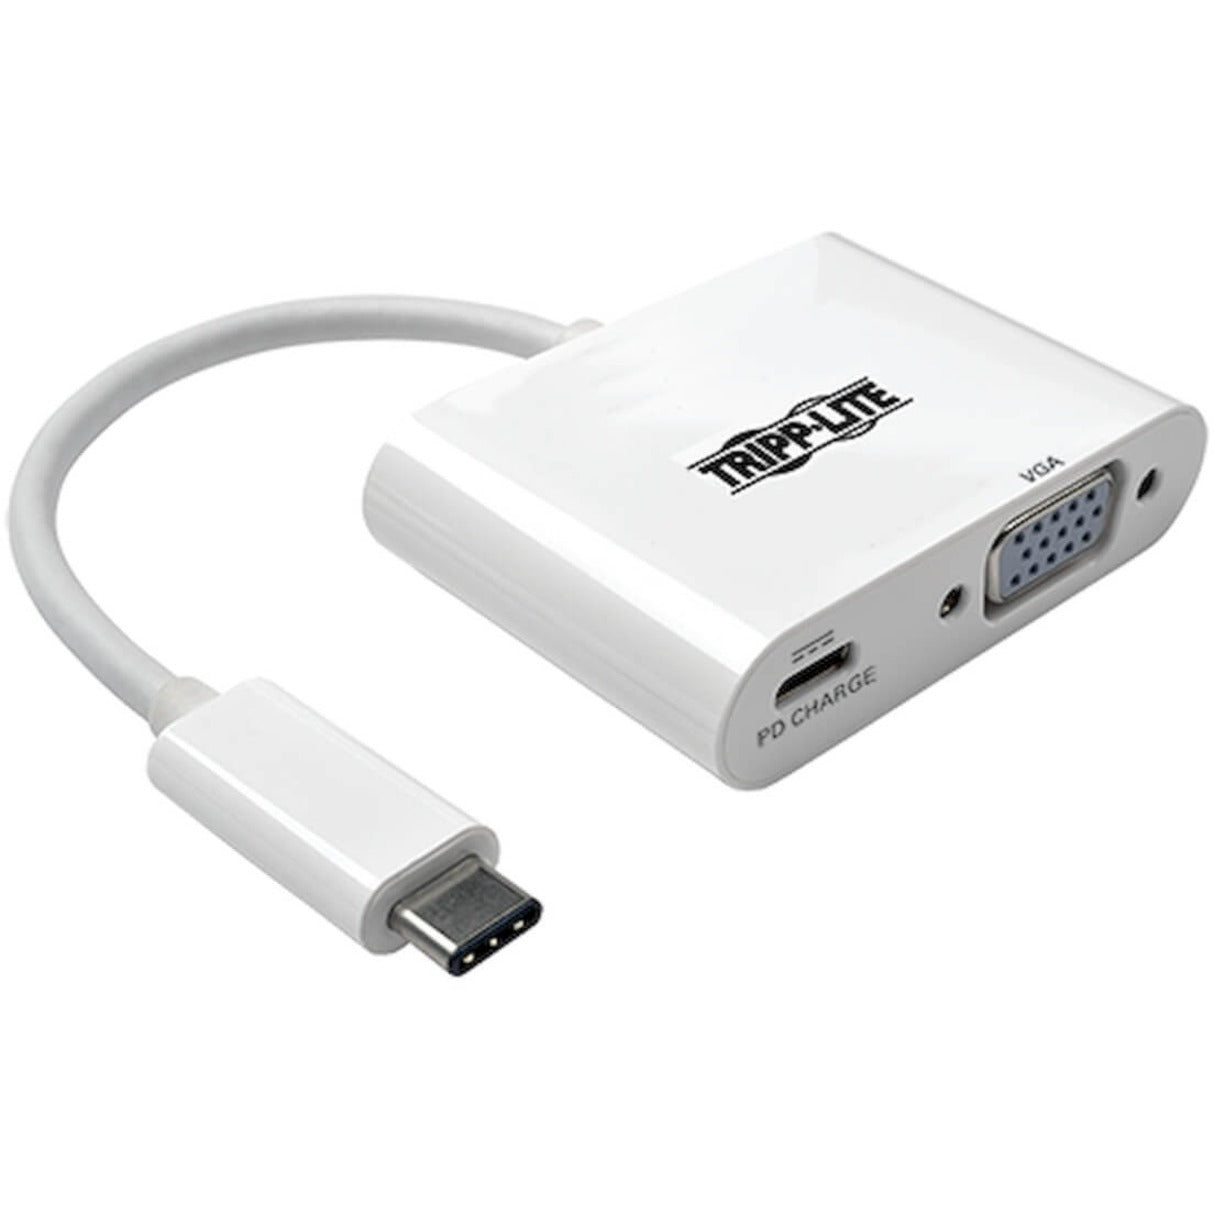 Tripp Lite U444-06N-V-C USB-C to VGA Adapter, USB-A Hub and Charging Ports